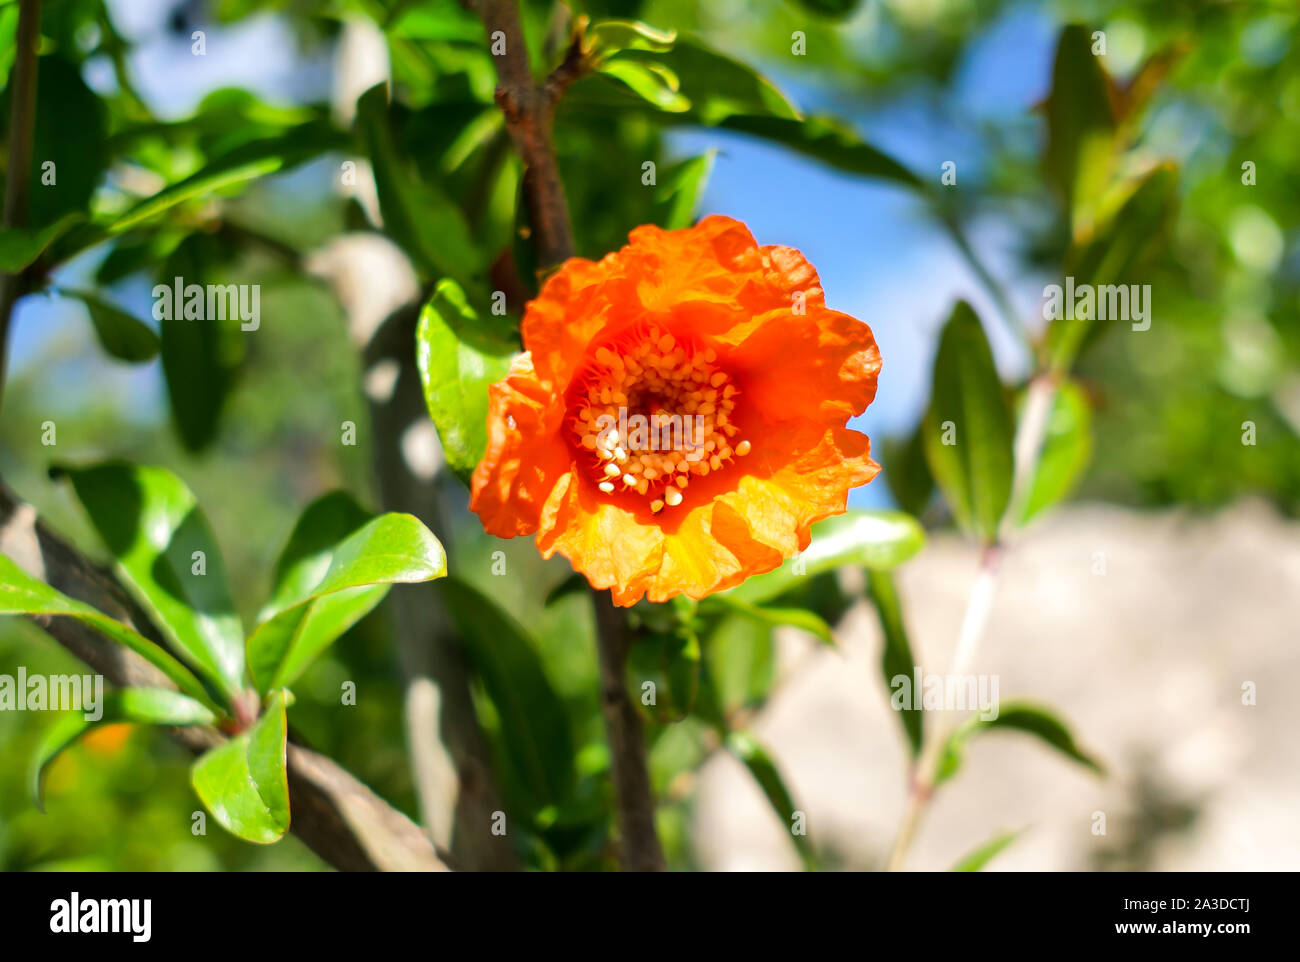 Bright blooming pomegranate flower, close-up Stock Photo